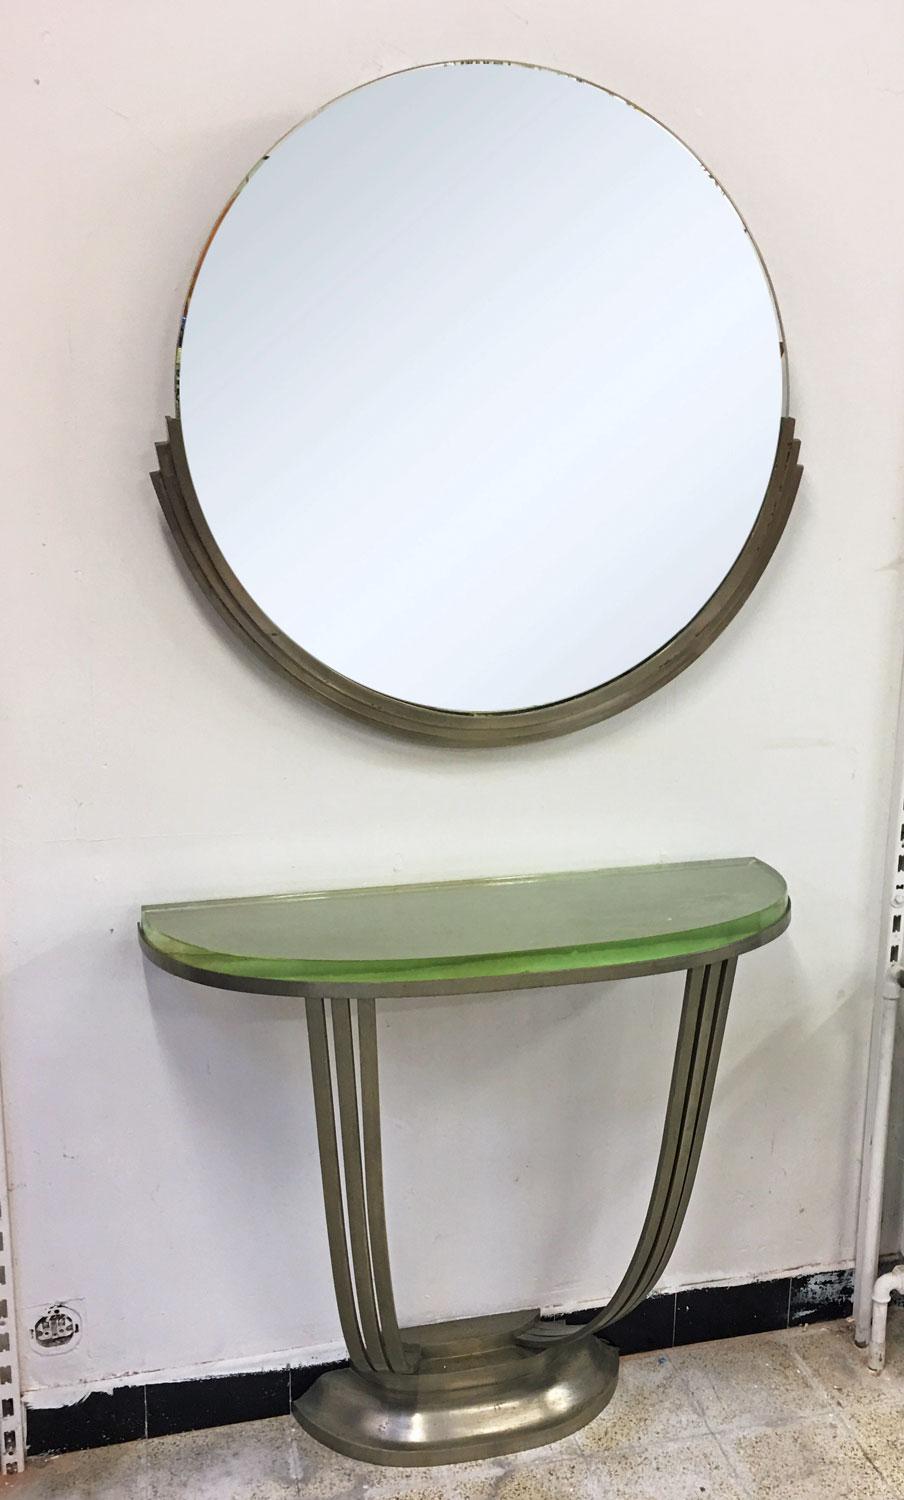 Rare console and its nickeled bronze mirror in the style of Jules Leleu, circa 1930
the glass which is 30mm thick has small flaws (chips) but below, very little visible when the glass is placed
Dimensions: console 84 x 89 x 38 cm
diameter mirror 85